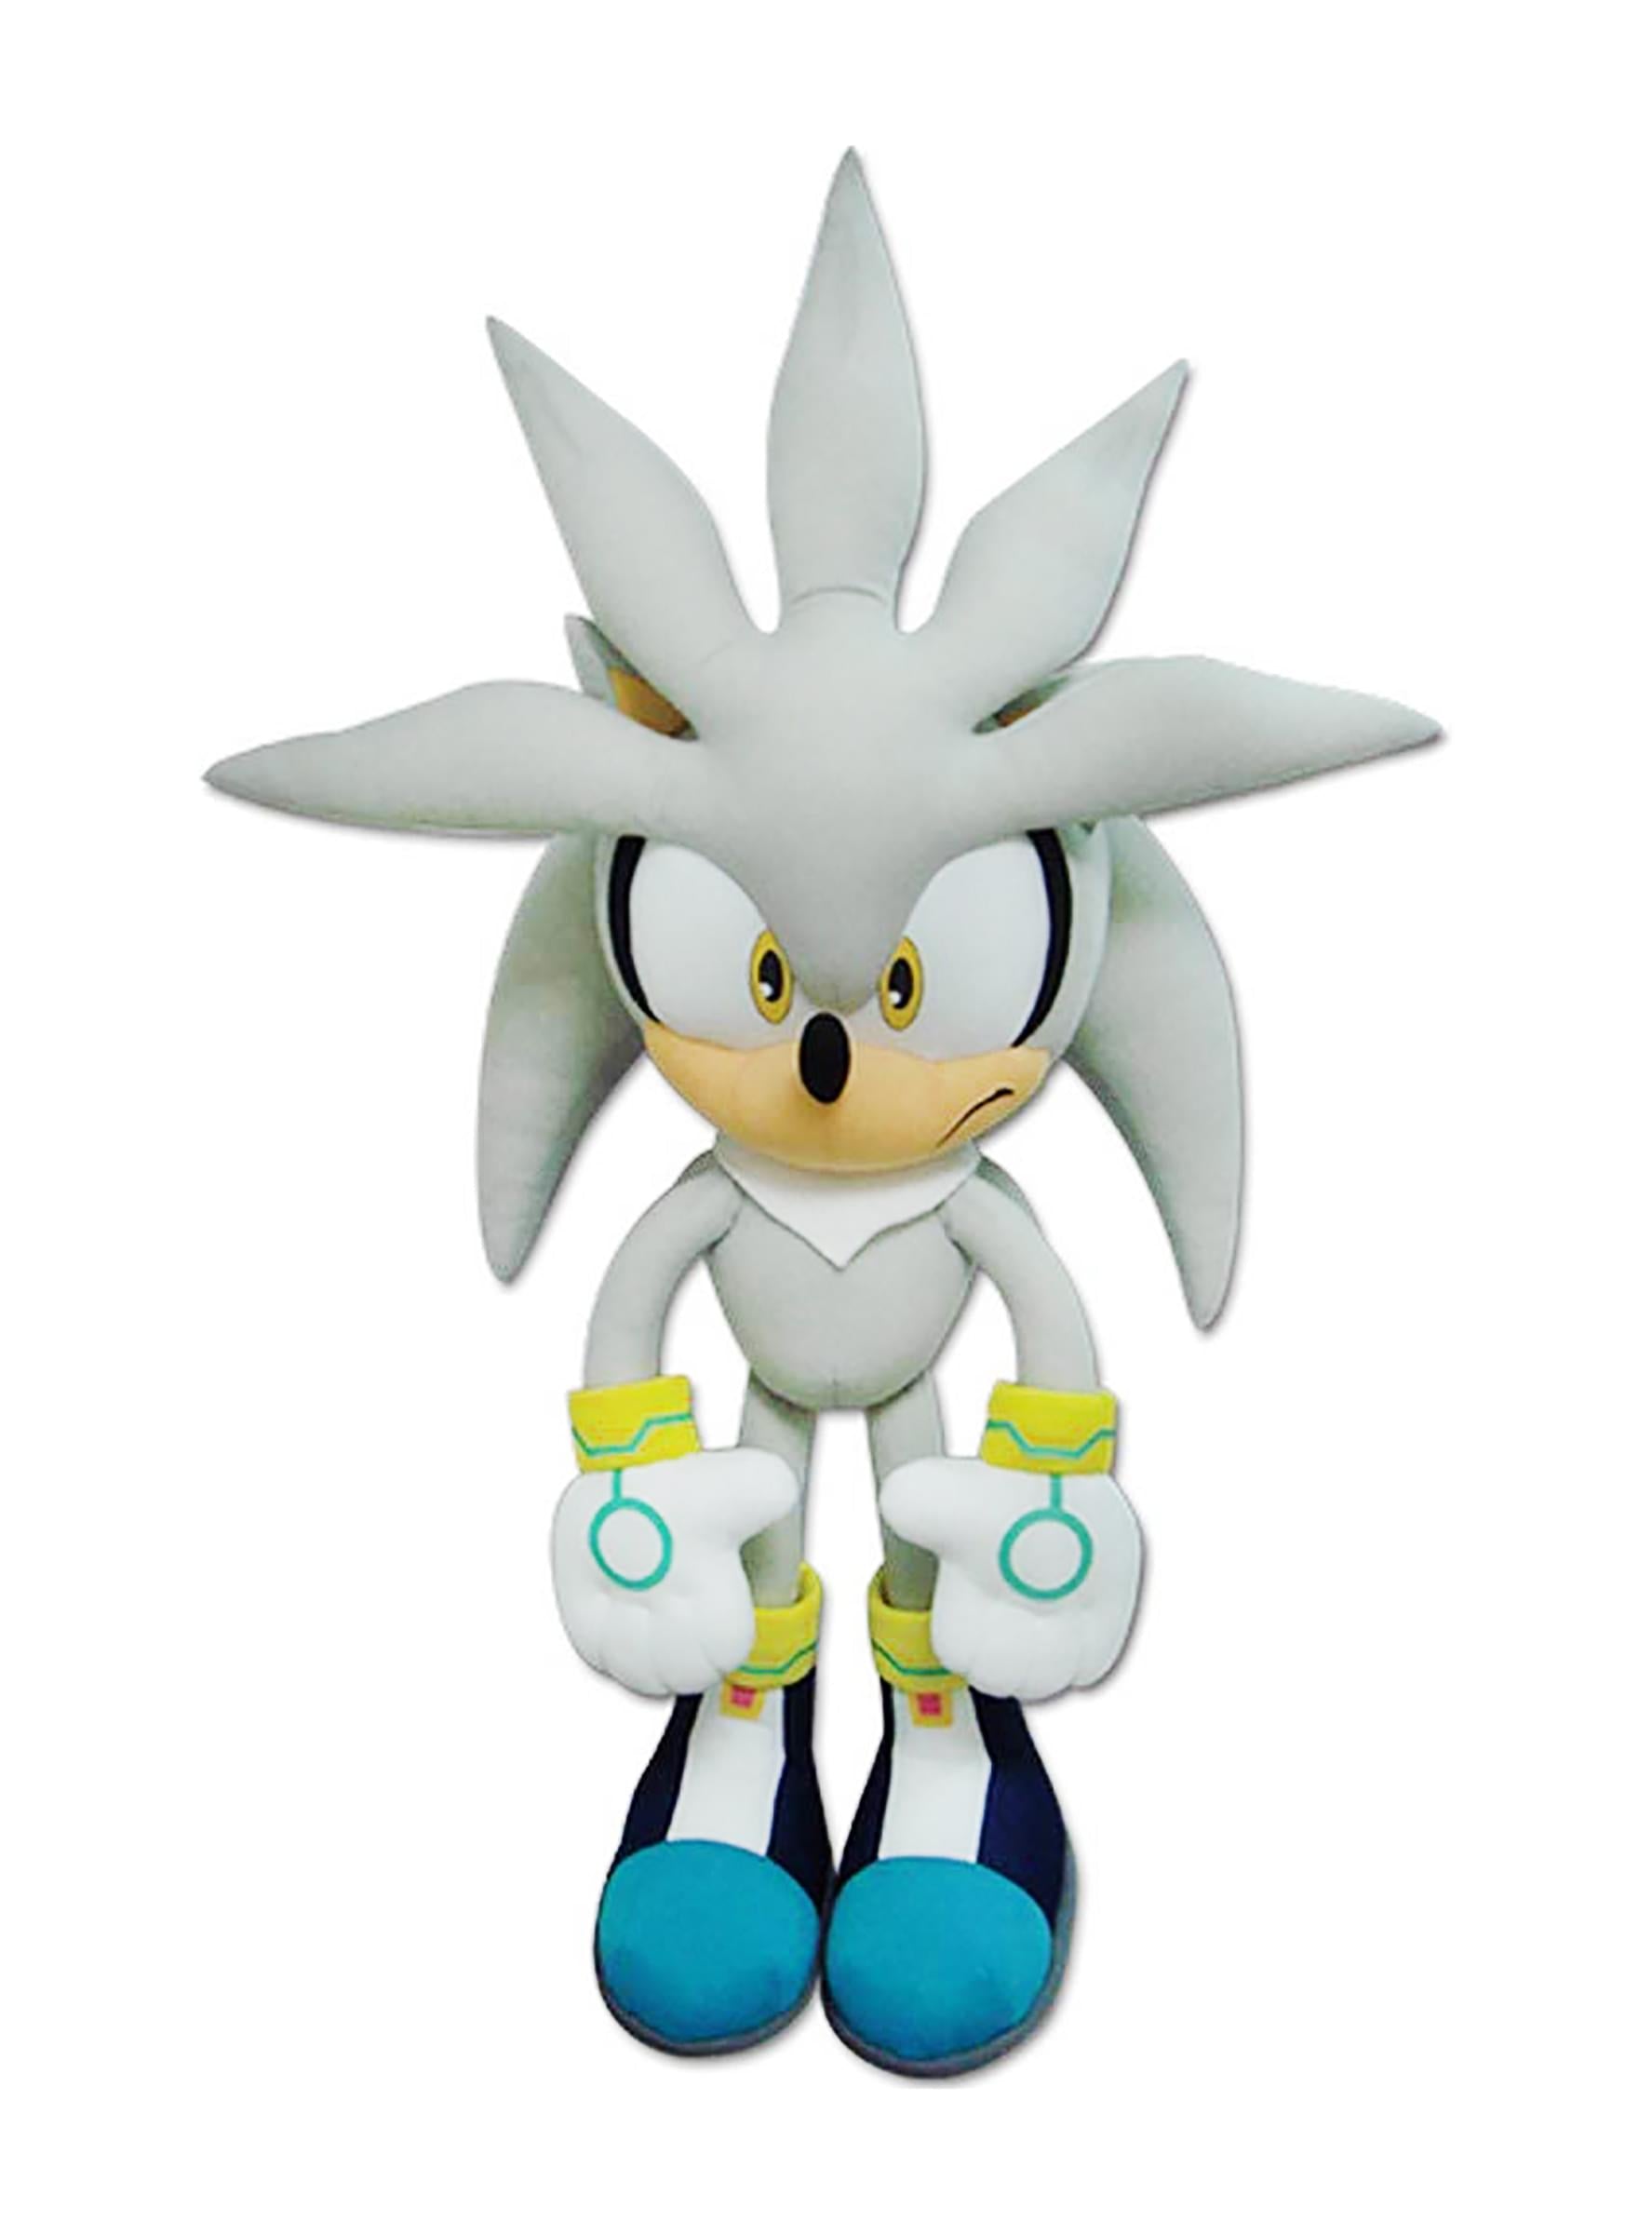  More Toys SONIC - Five Power Rings - In a Gift Bag